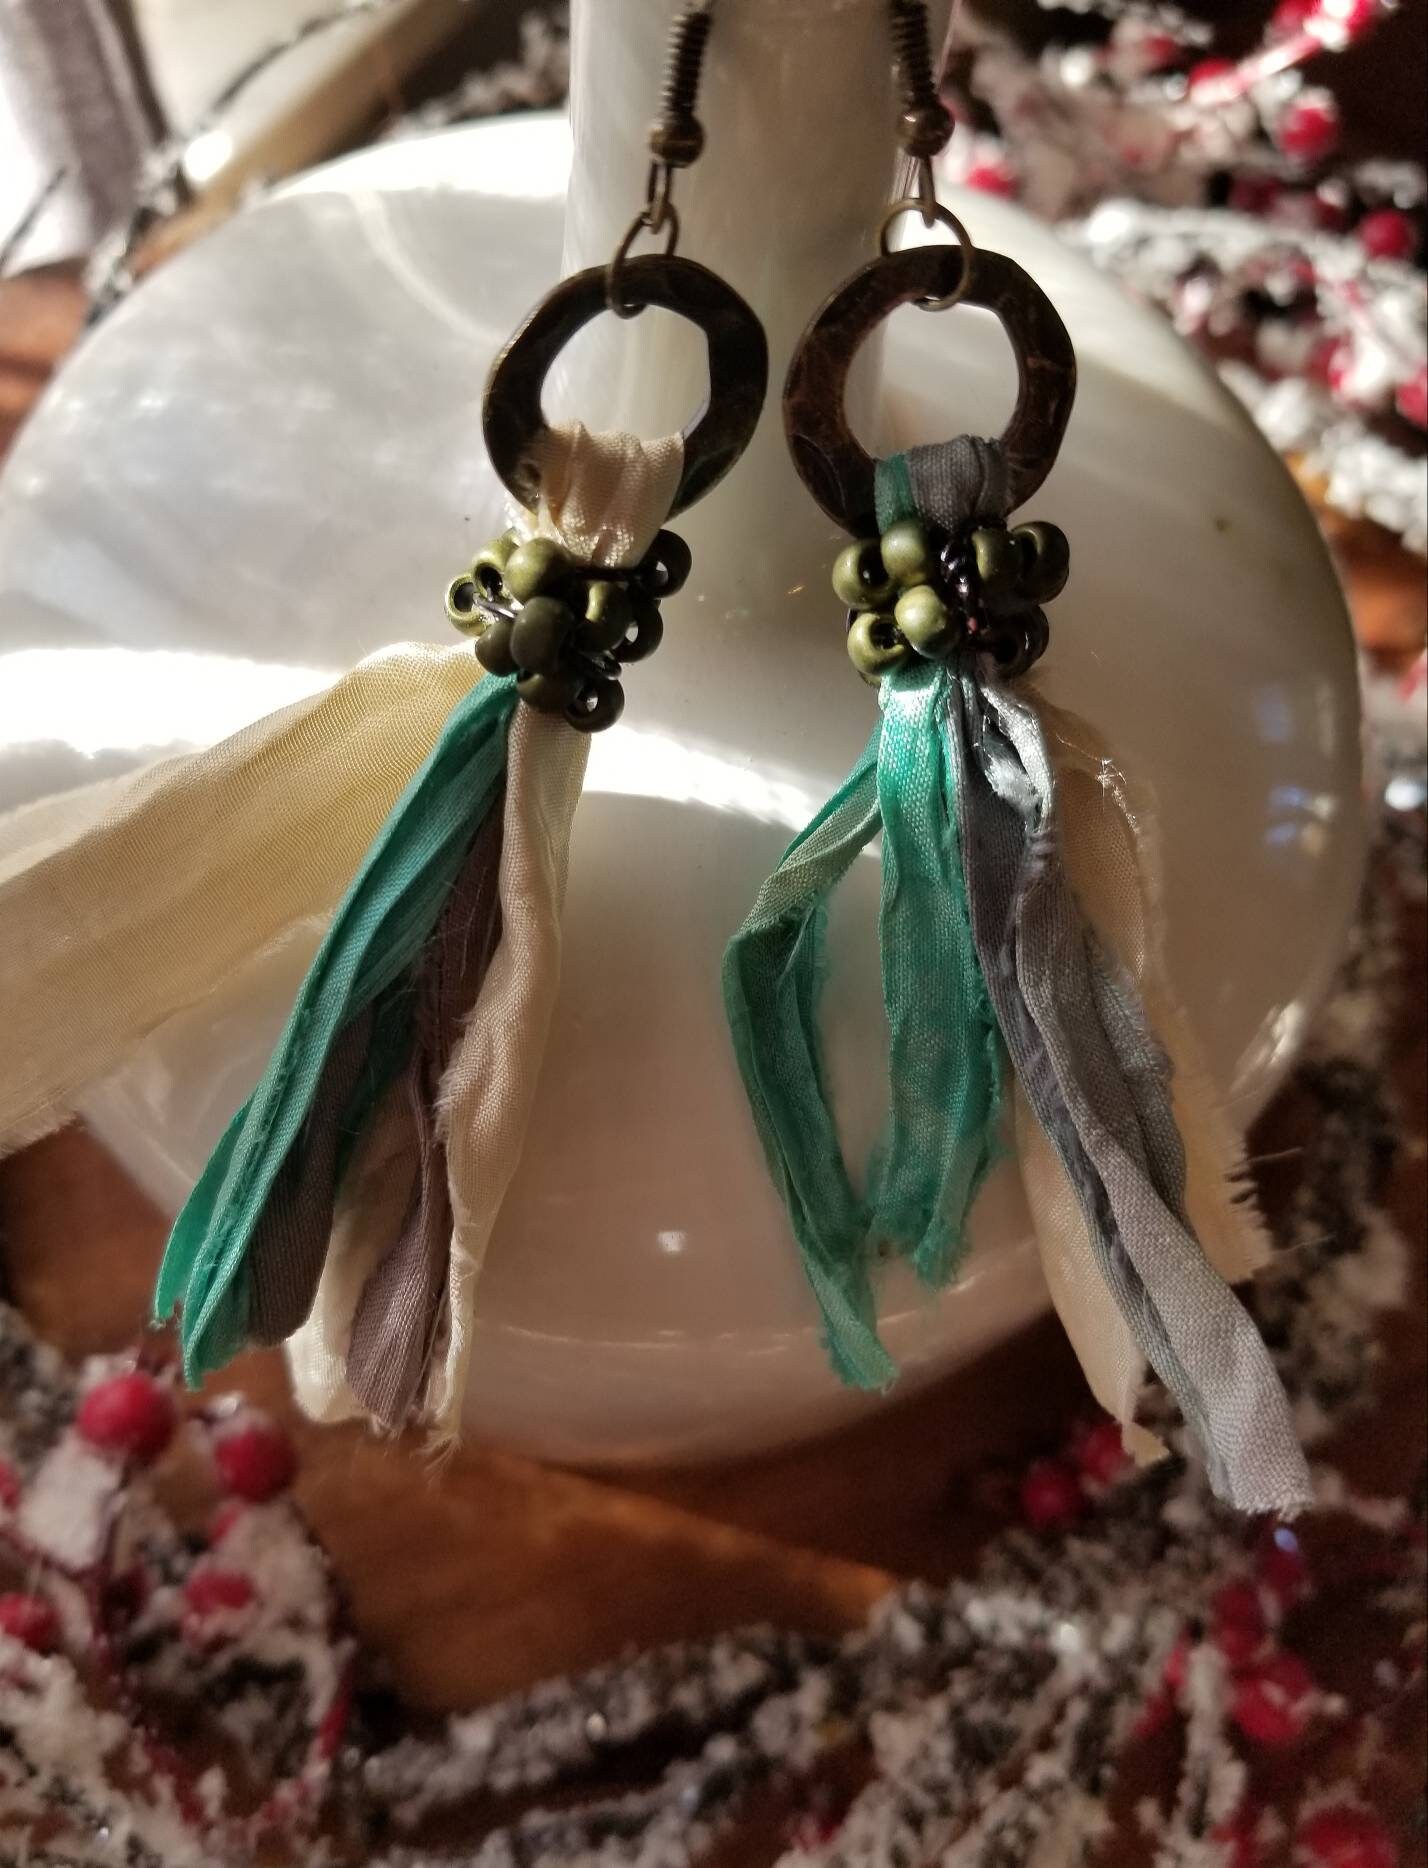 Sari Silk Ribbon Hoop Tassel Silver Plated Statement Earrings - Upcycled Boho Fabric Gift for Her Turquoise